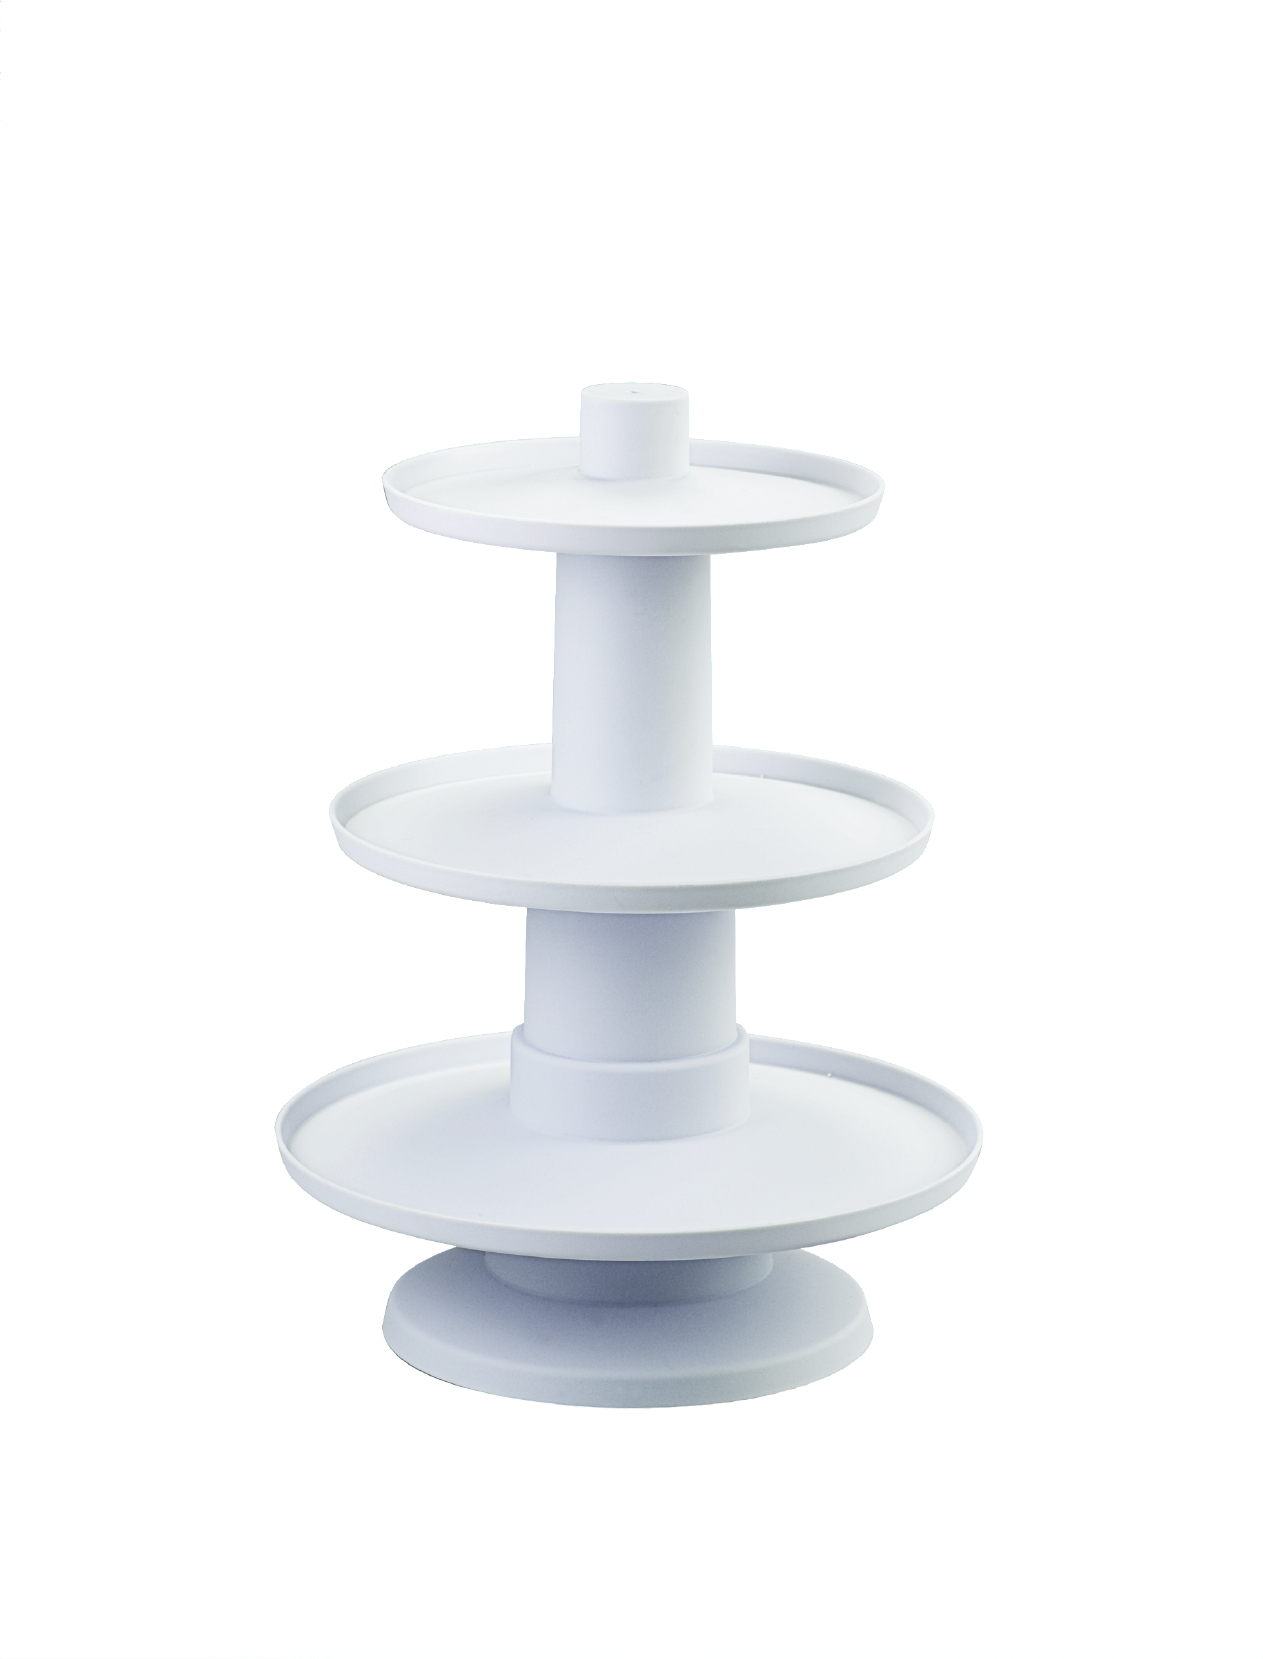 Wilton Stacked 3-Tier Cupcake and Dessert Tower, 1.8 lb - image 2 of 10